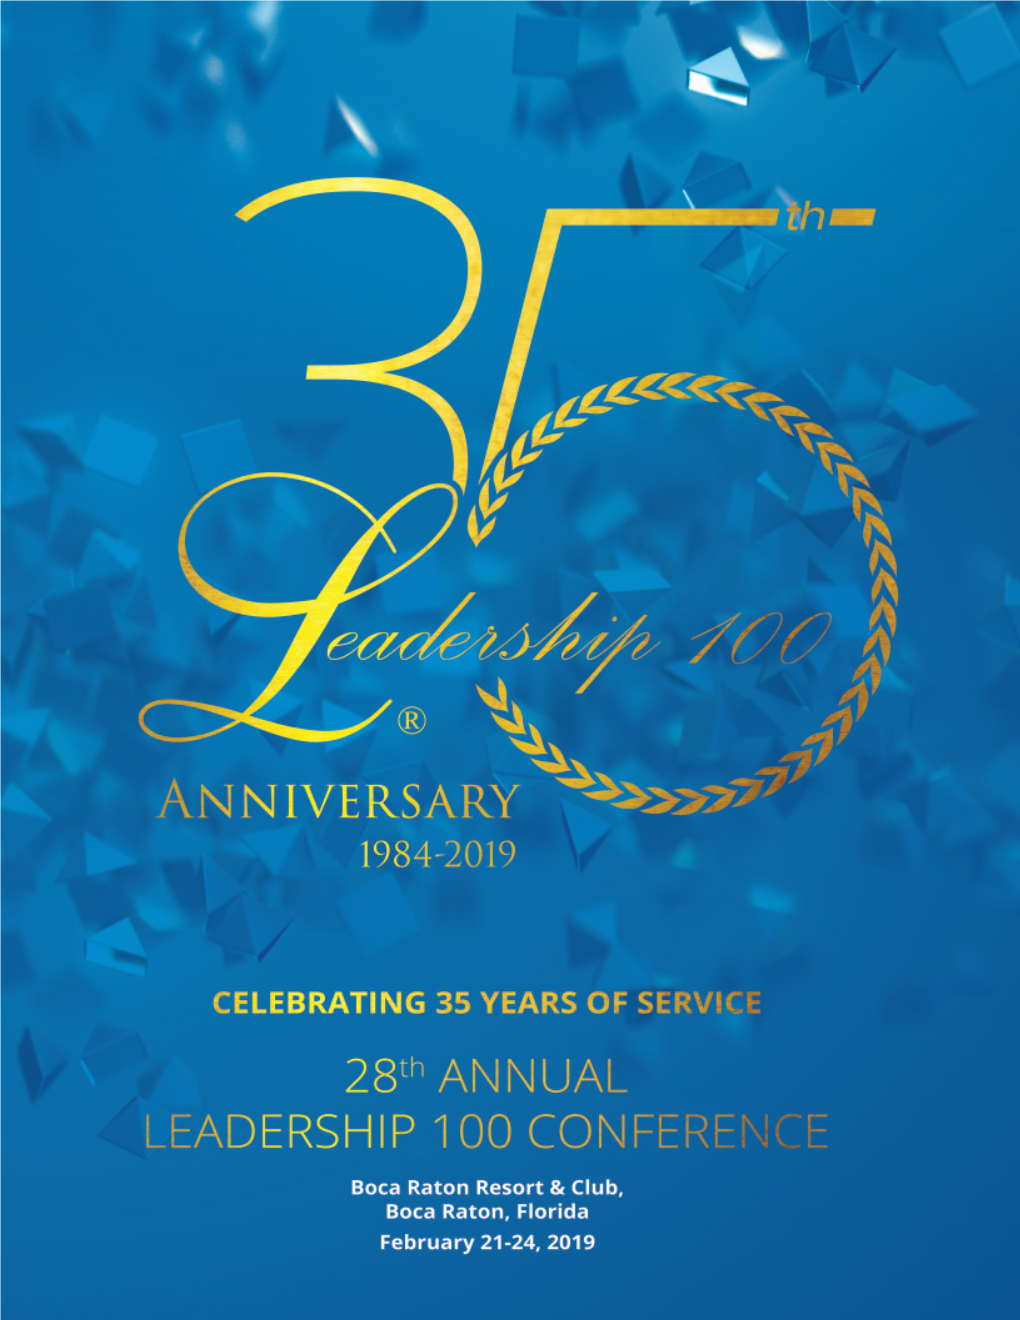 28Th Annual Leadership 100 Conference Boca Raton Resort & Club to FEBRUARY 2019 February 21-24, 2019 PROGRAM NEW and FULFILLED MEMBERS OF